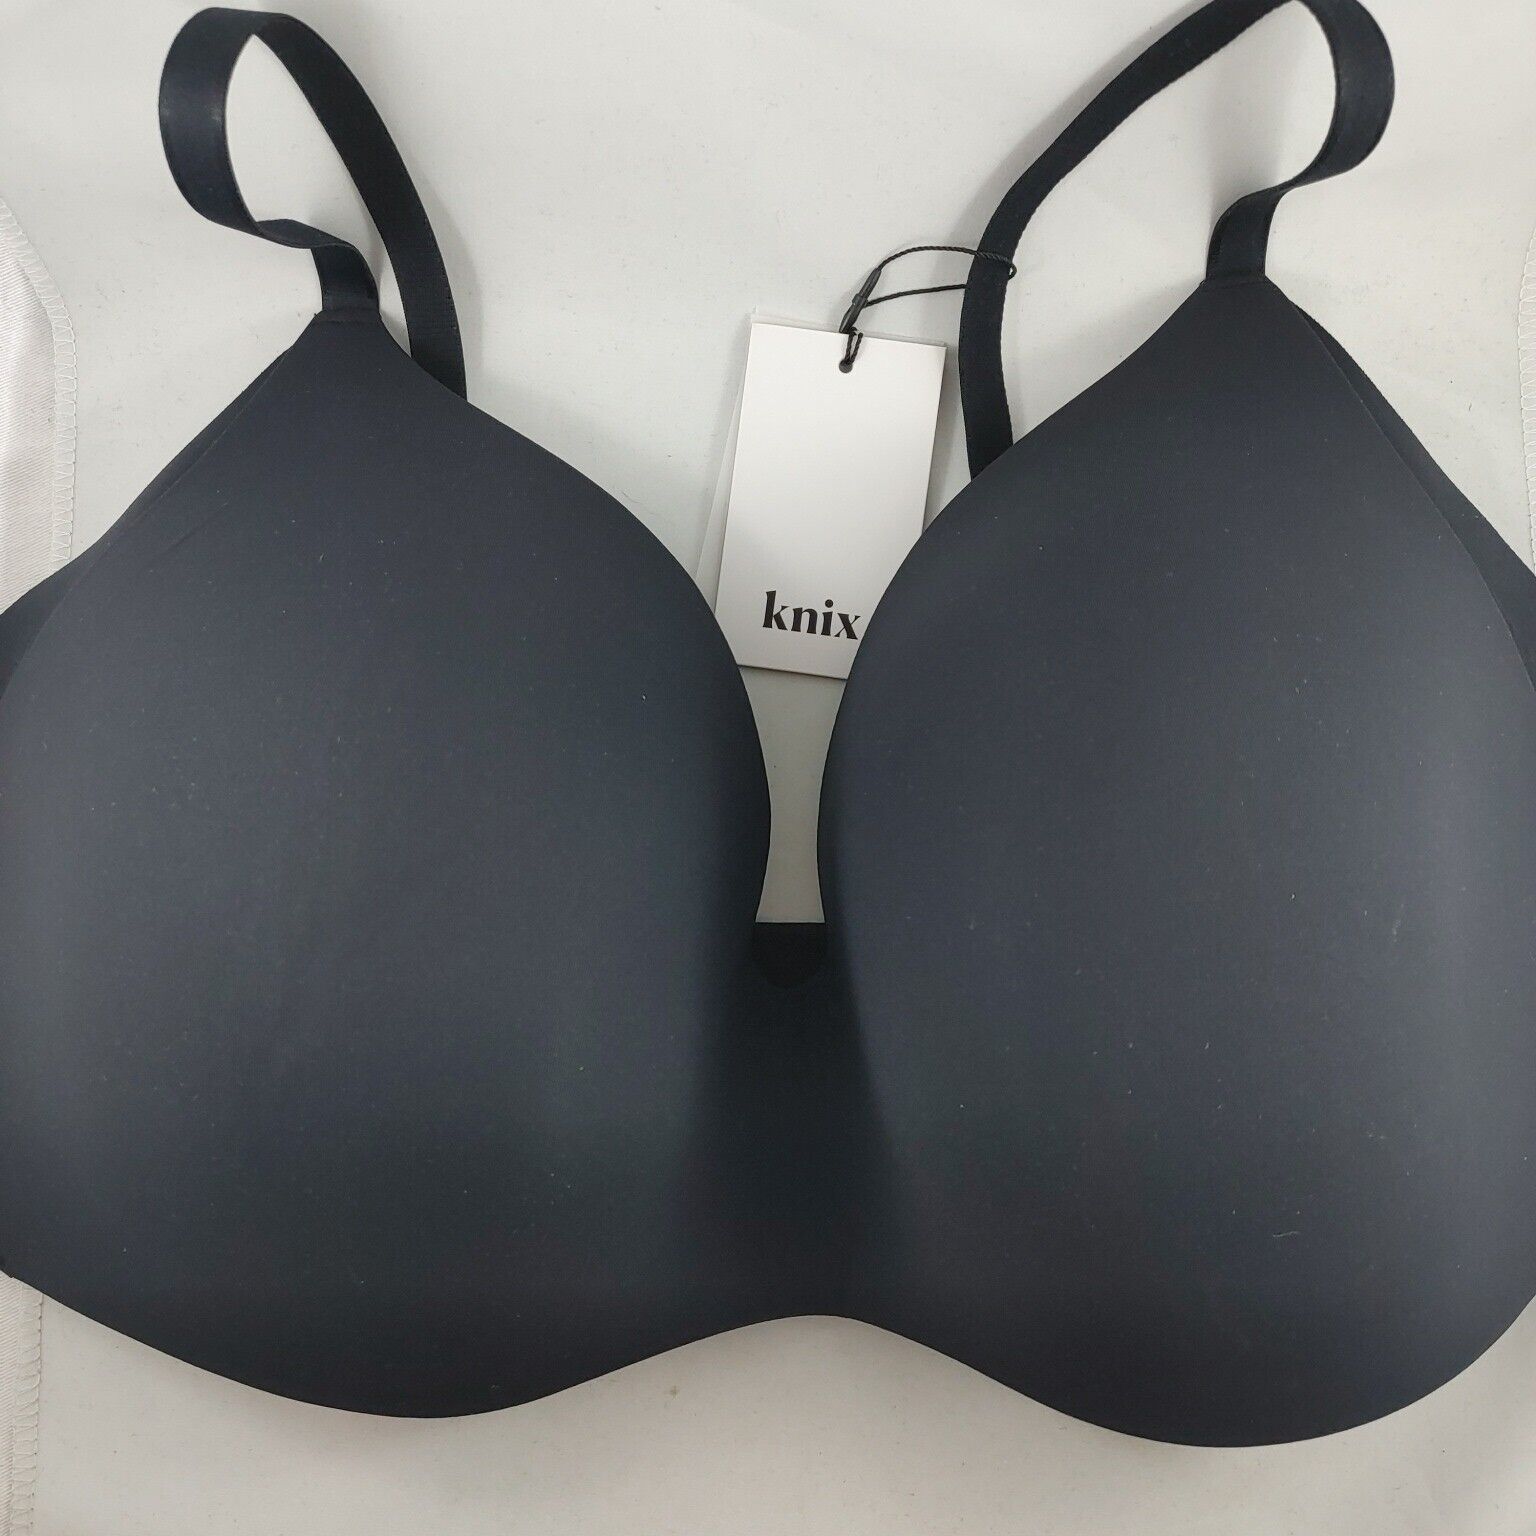 KNIX Wing Woman Contour Bra in Black - KNIX Size 8+ Padded Wirefree New  B103